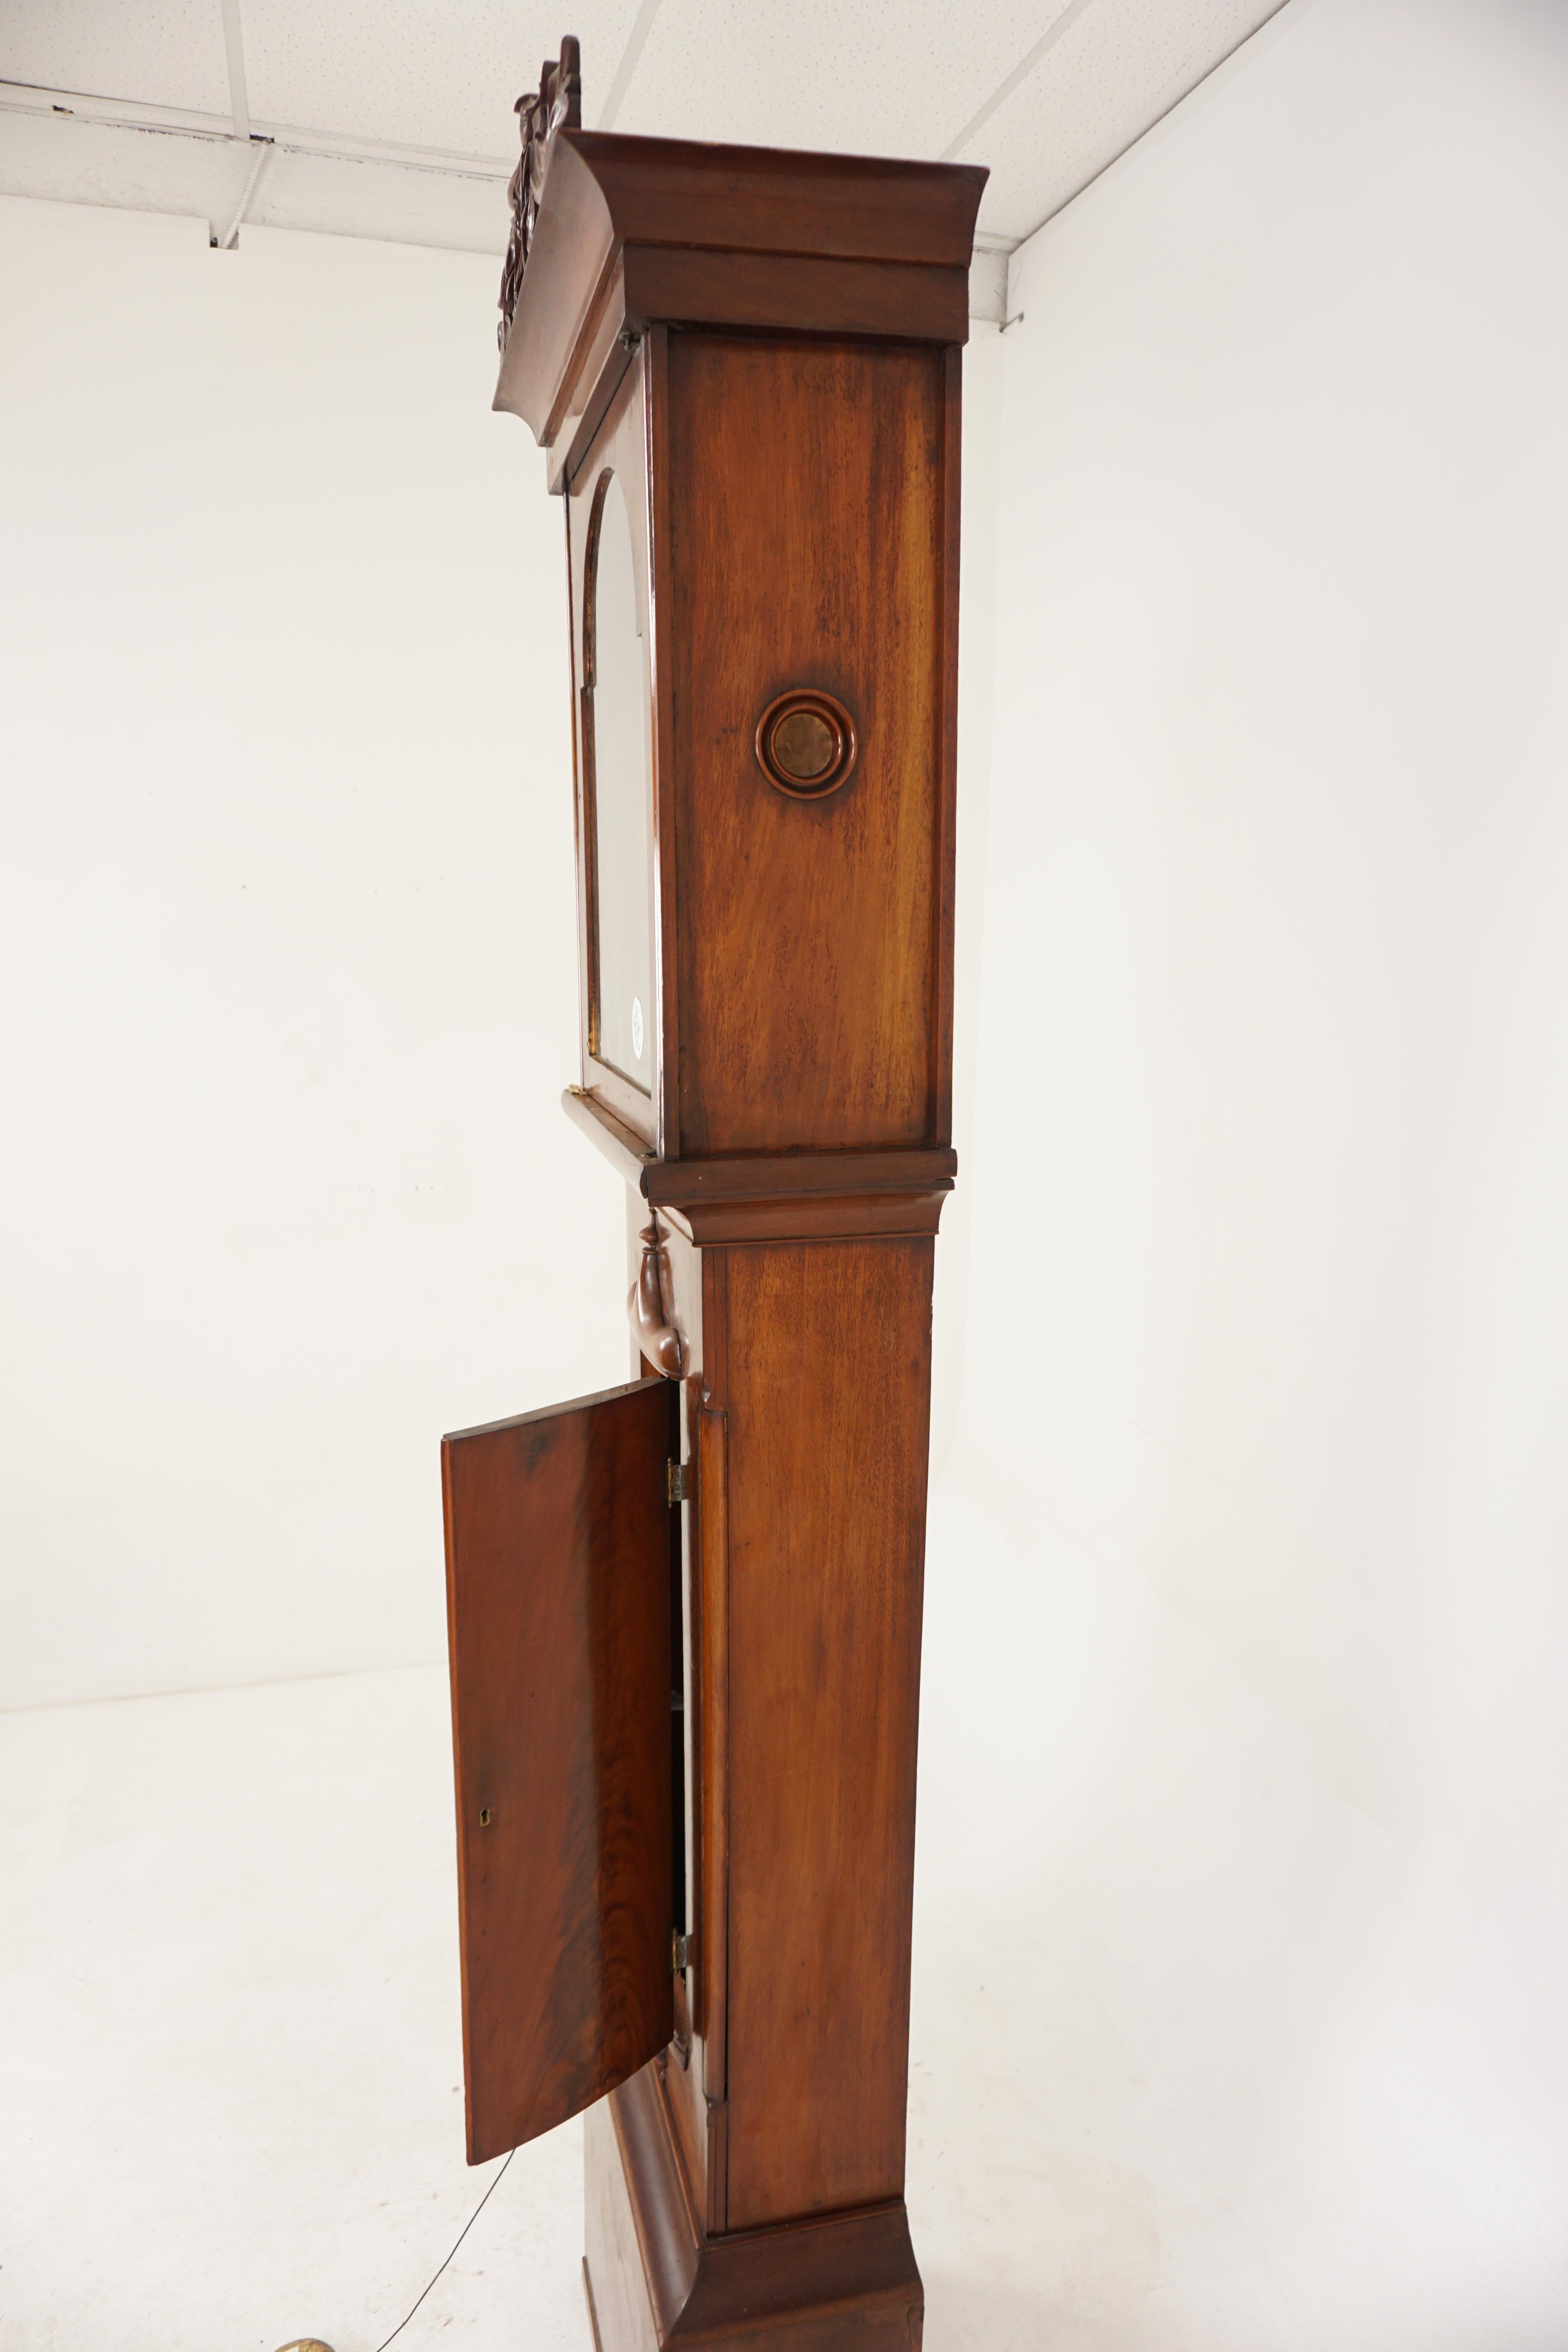 Vic. Grandfather Long Case Clock by Jas Huston of Johnstone, Scotland 1870 H182 5